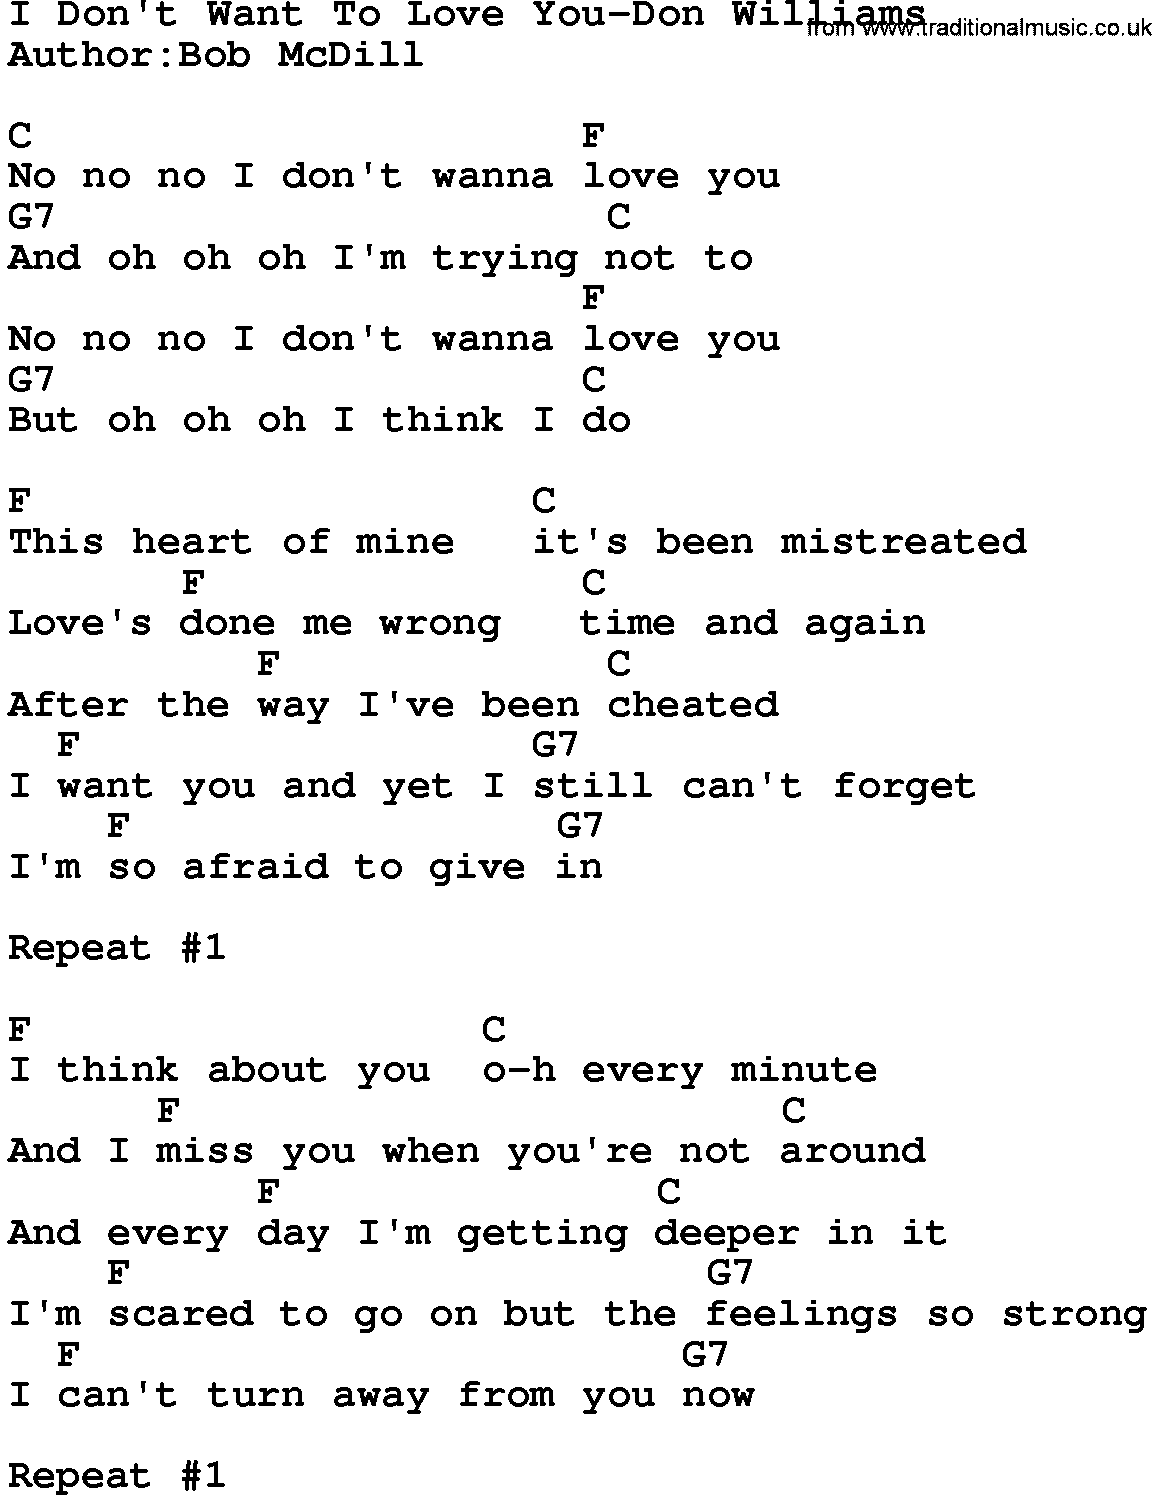 Country music song: I Don't Want To Love You-Don Williams lyrics and chords